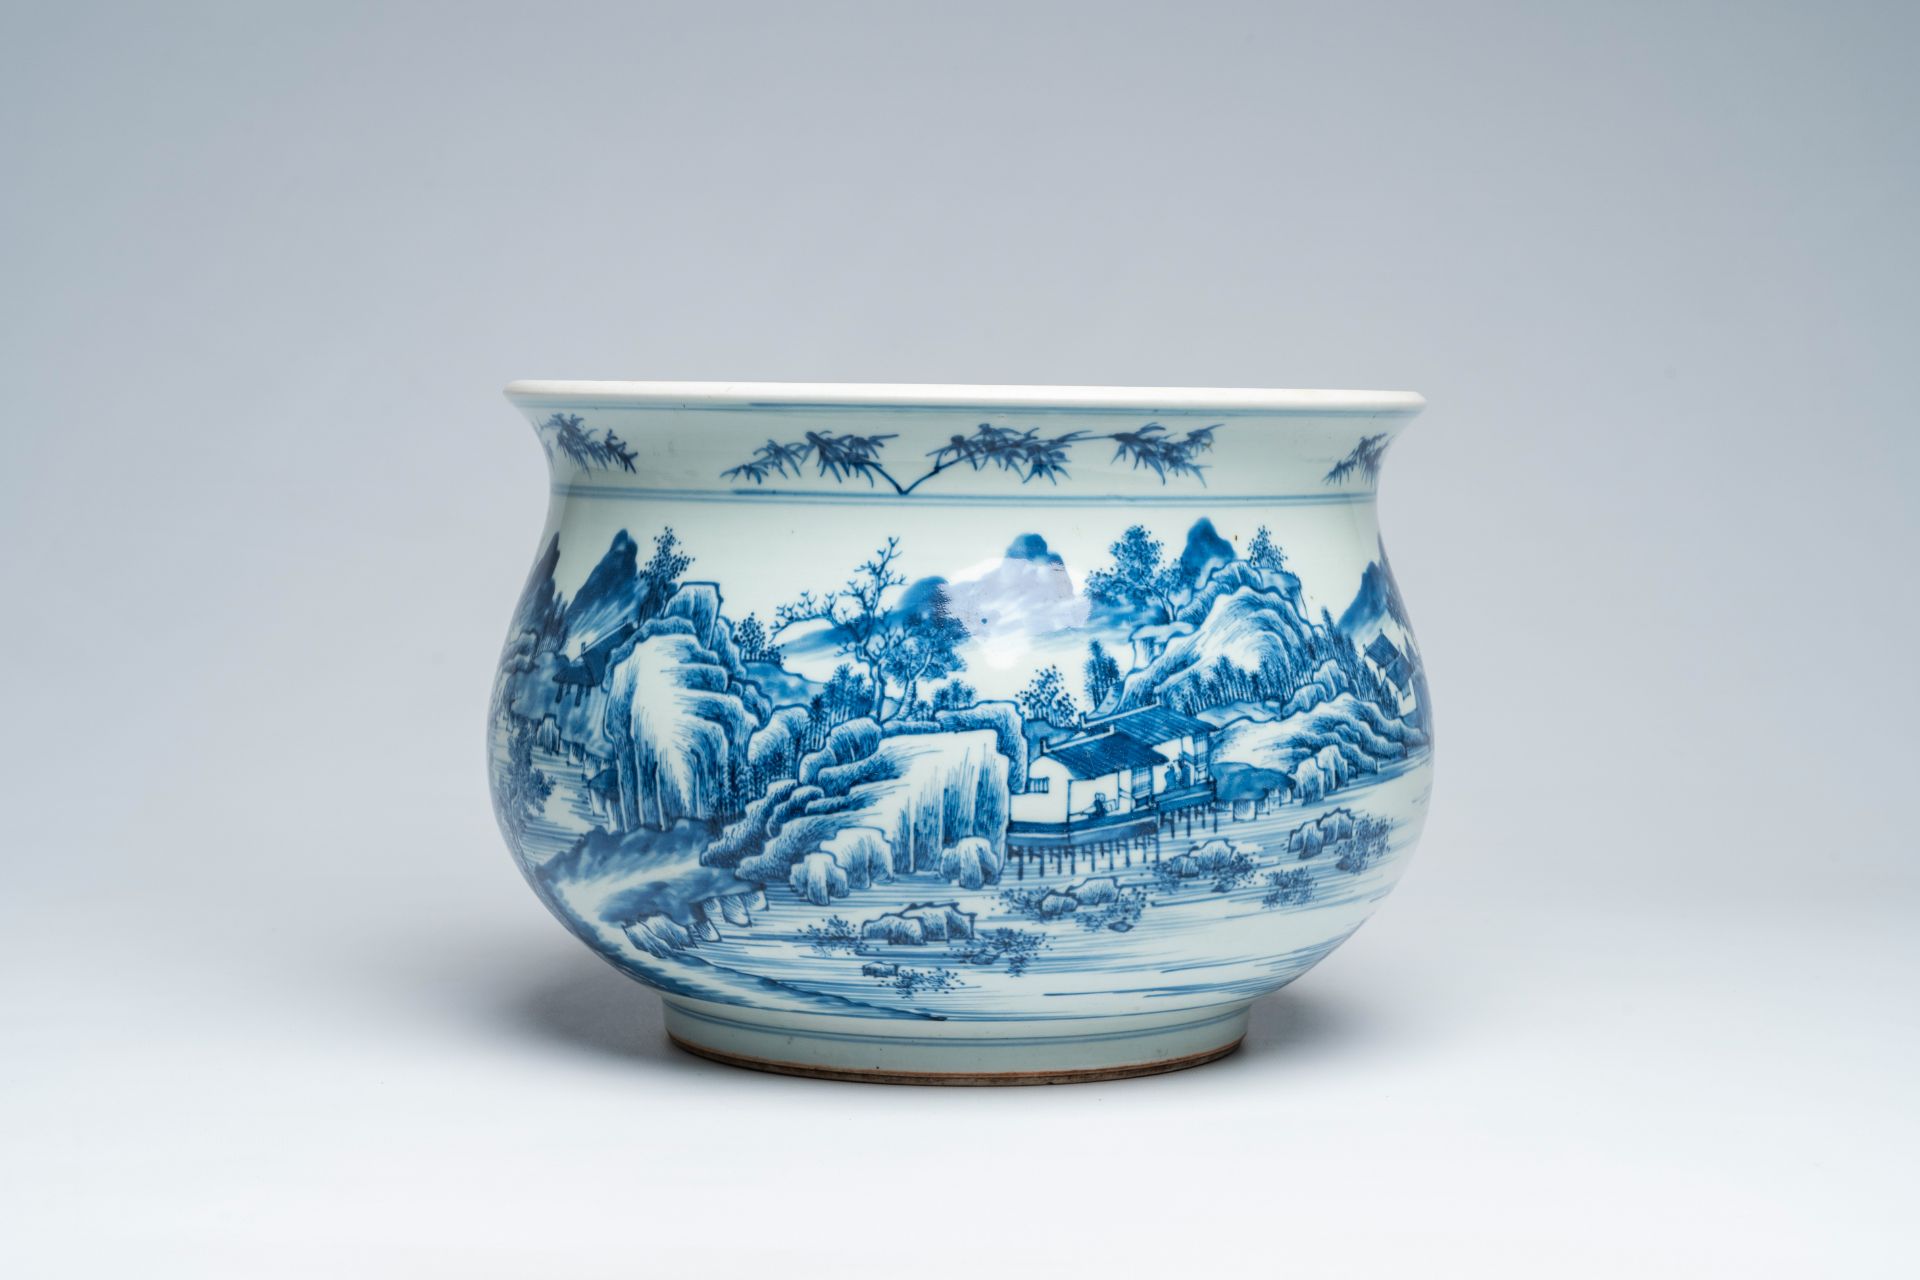 A large Chinese blue and white censer with a river landscape, 18th C. or later - Image 6 of 8